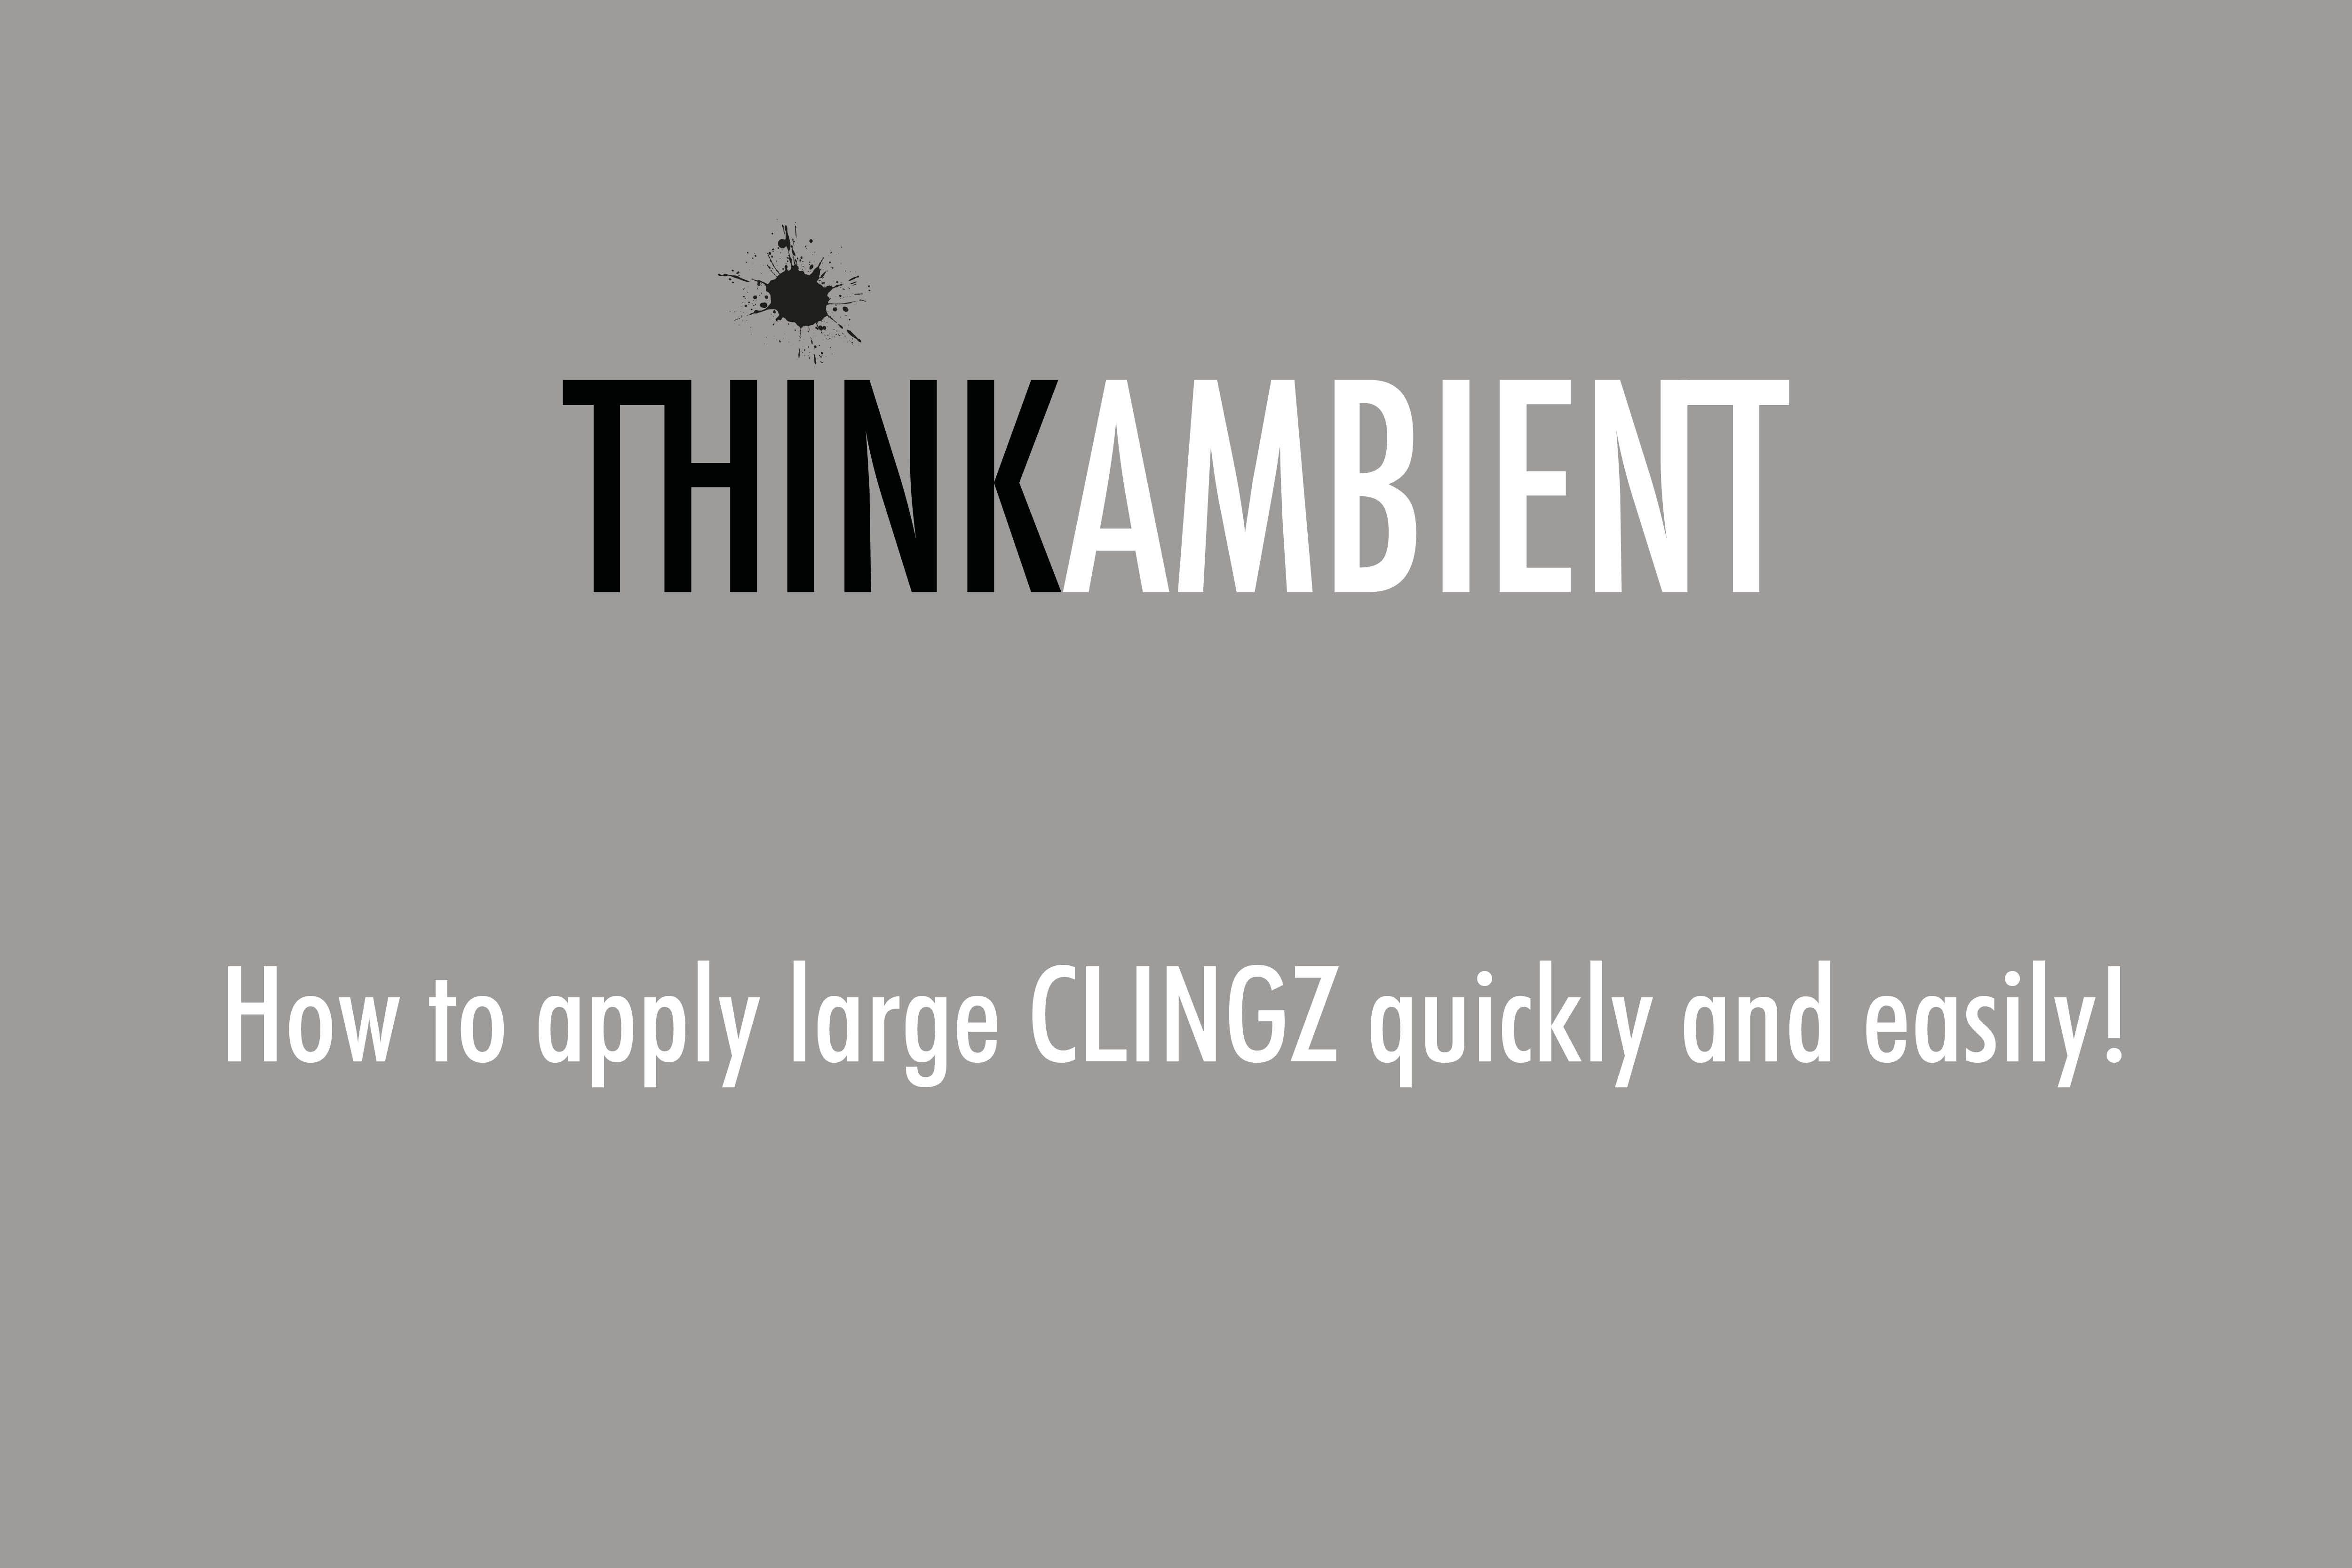 How to apply large CLINGZ quickly and easily!